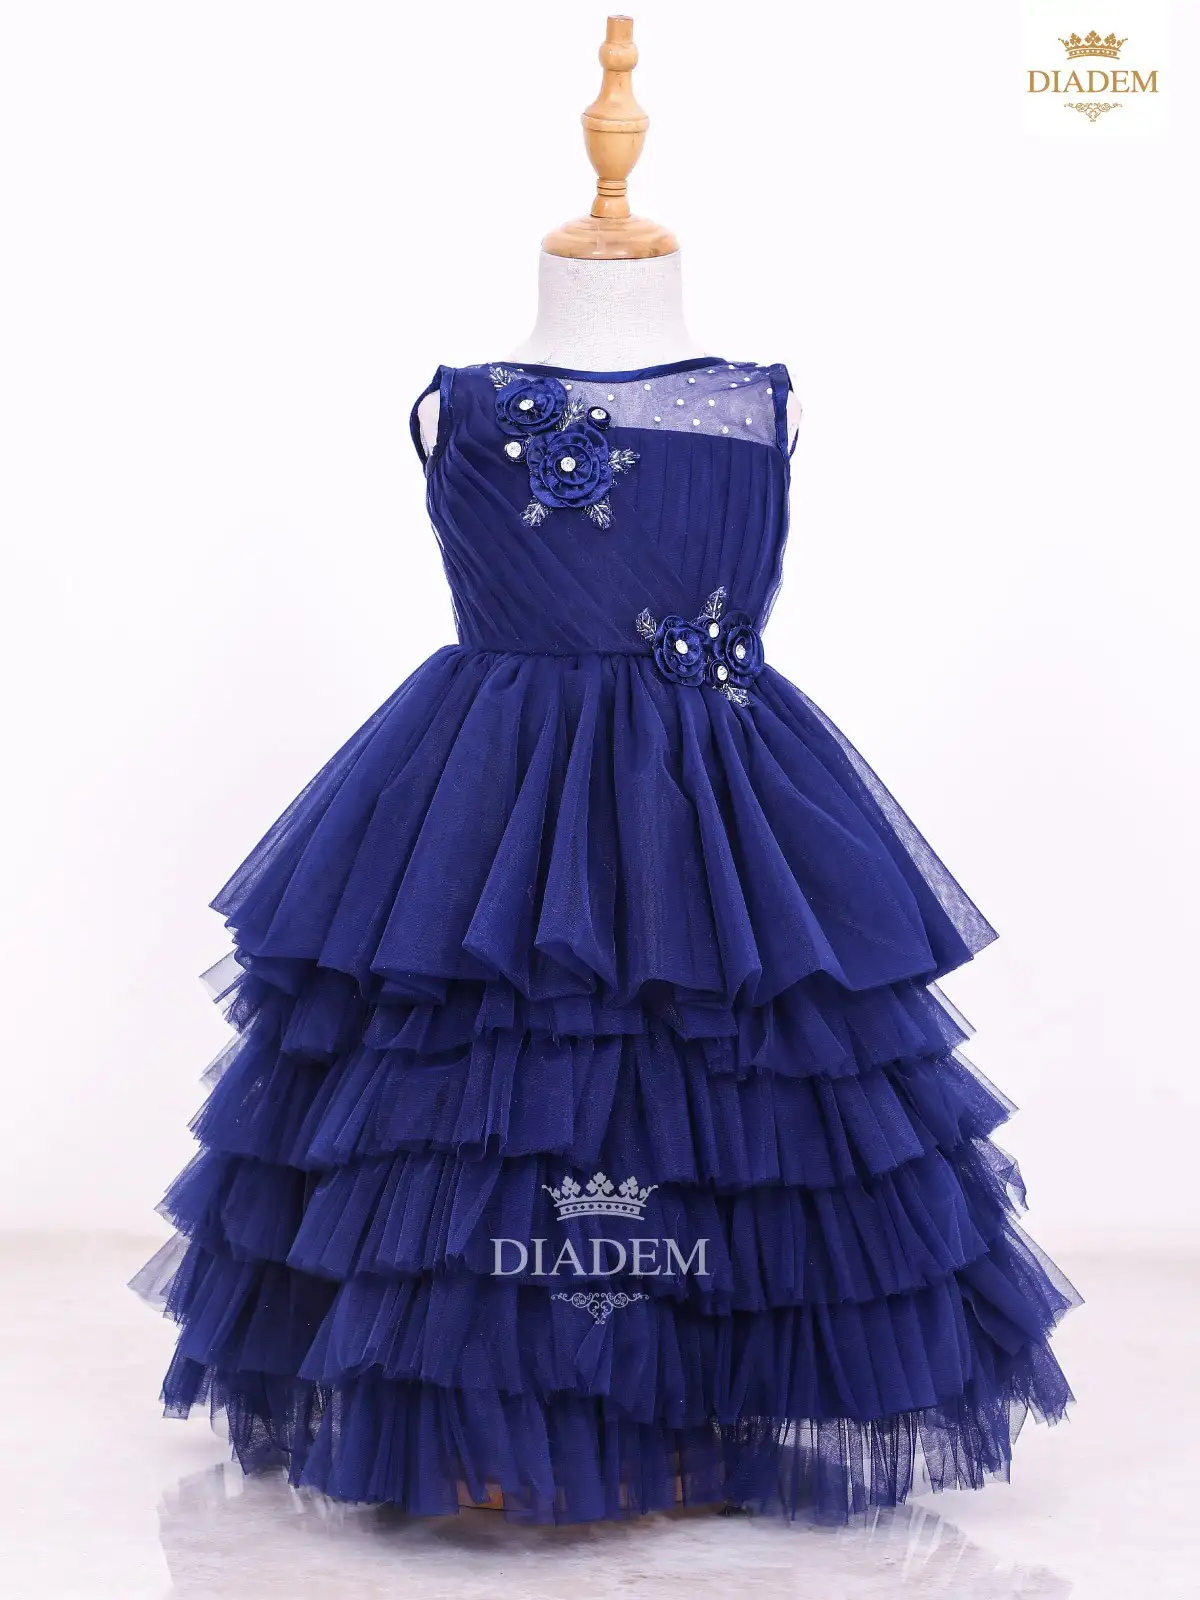 Dark Blue Gown Embellished In Crystal Beads And Frilled Bottom